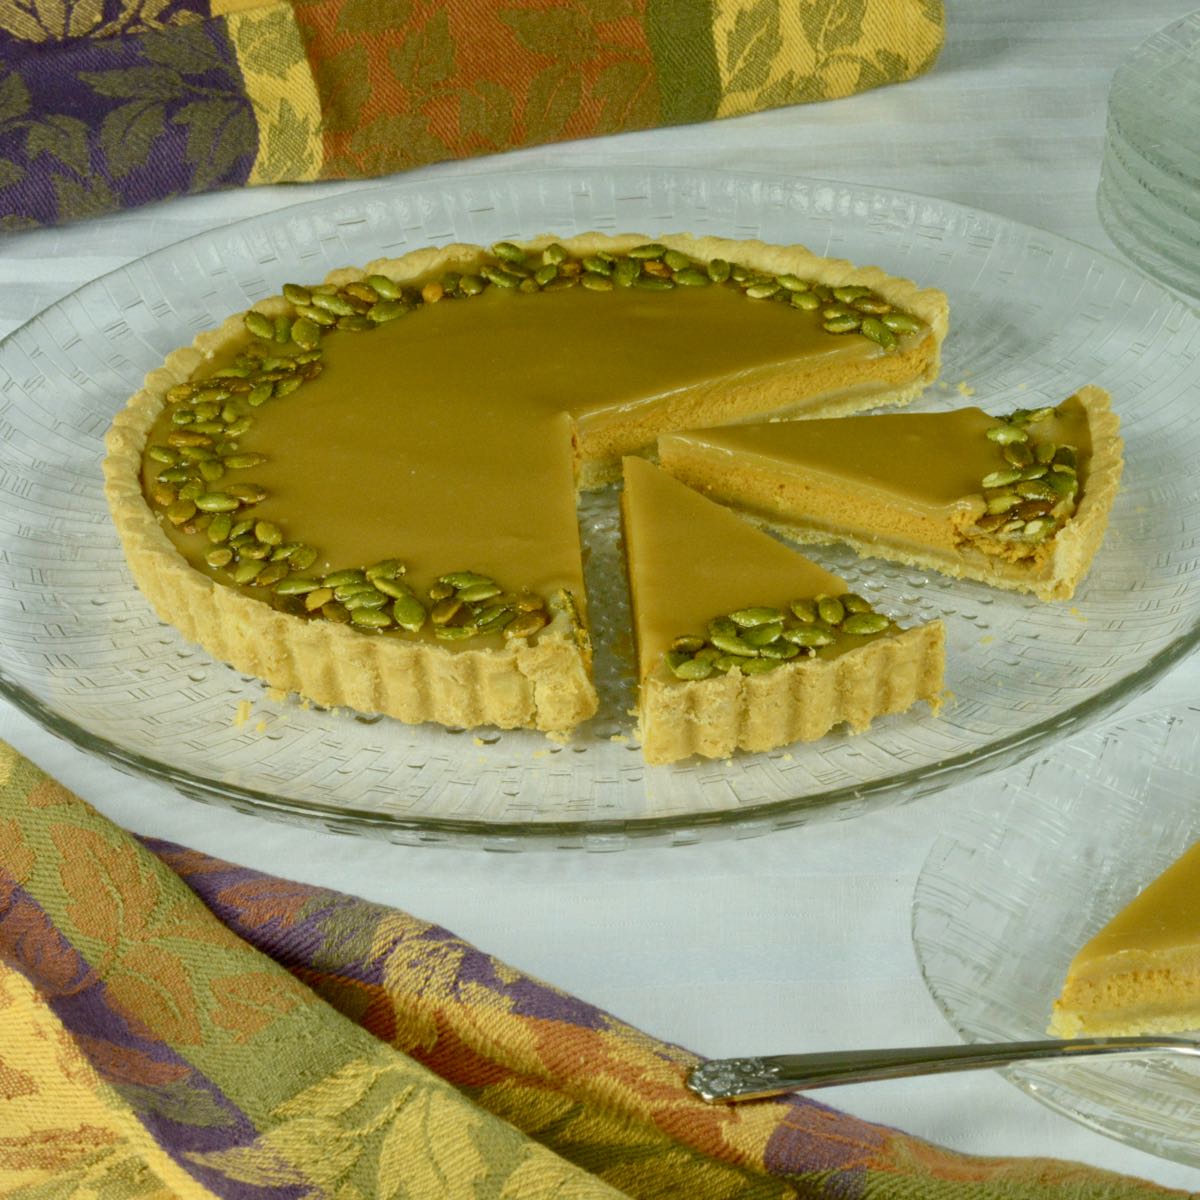 Bourbon Caramel Pumpkin Tart with two pieces cut and one served on a plate.